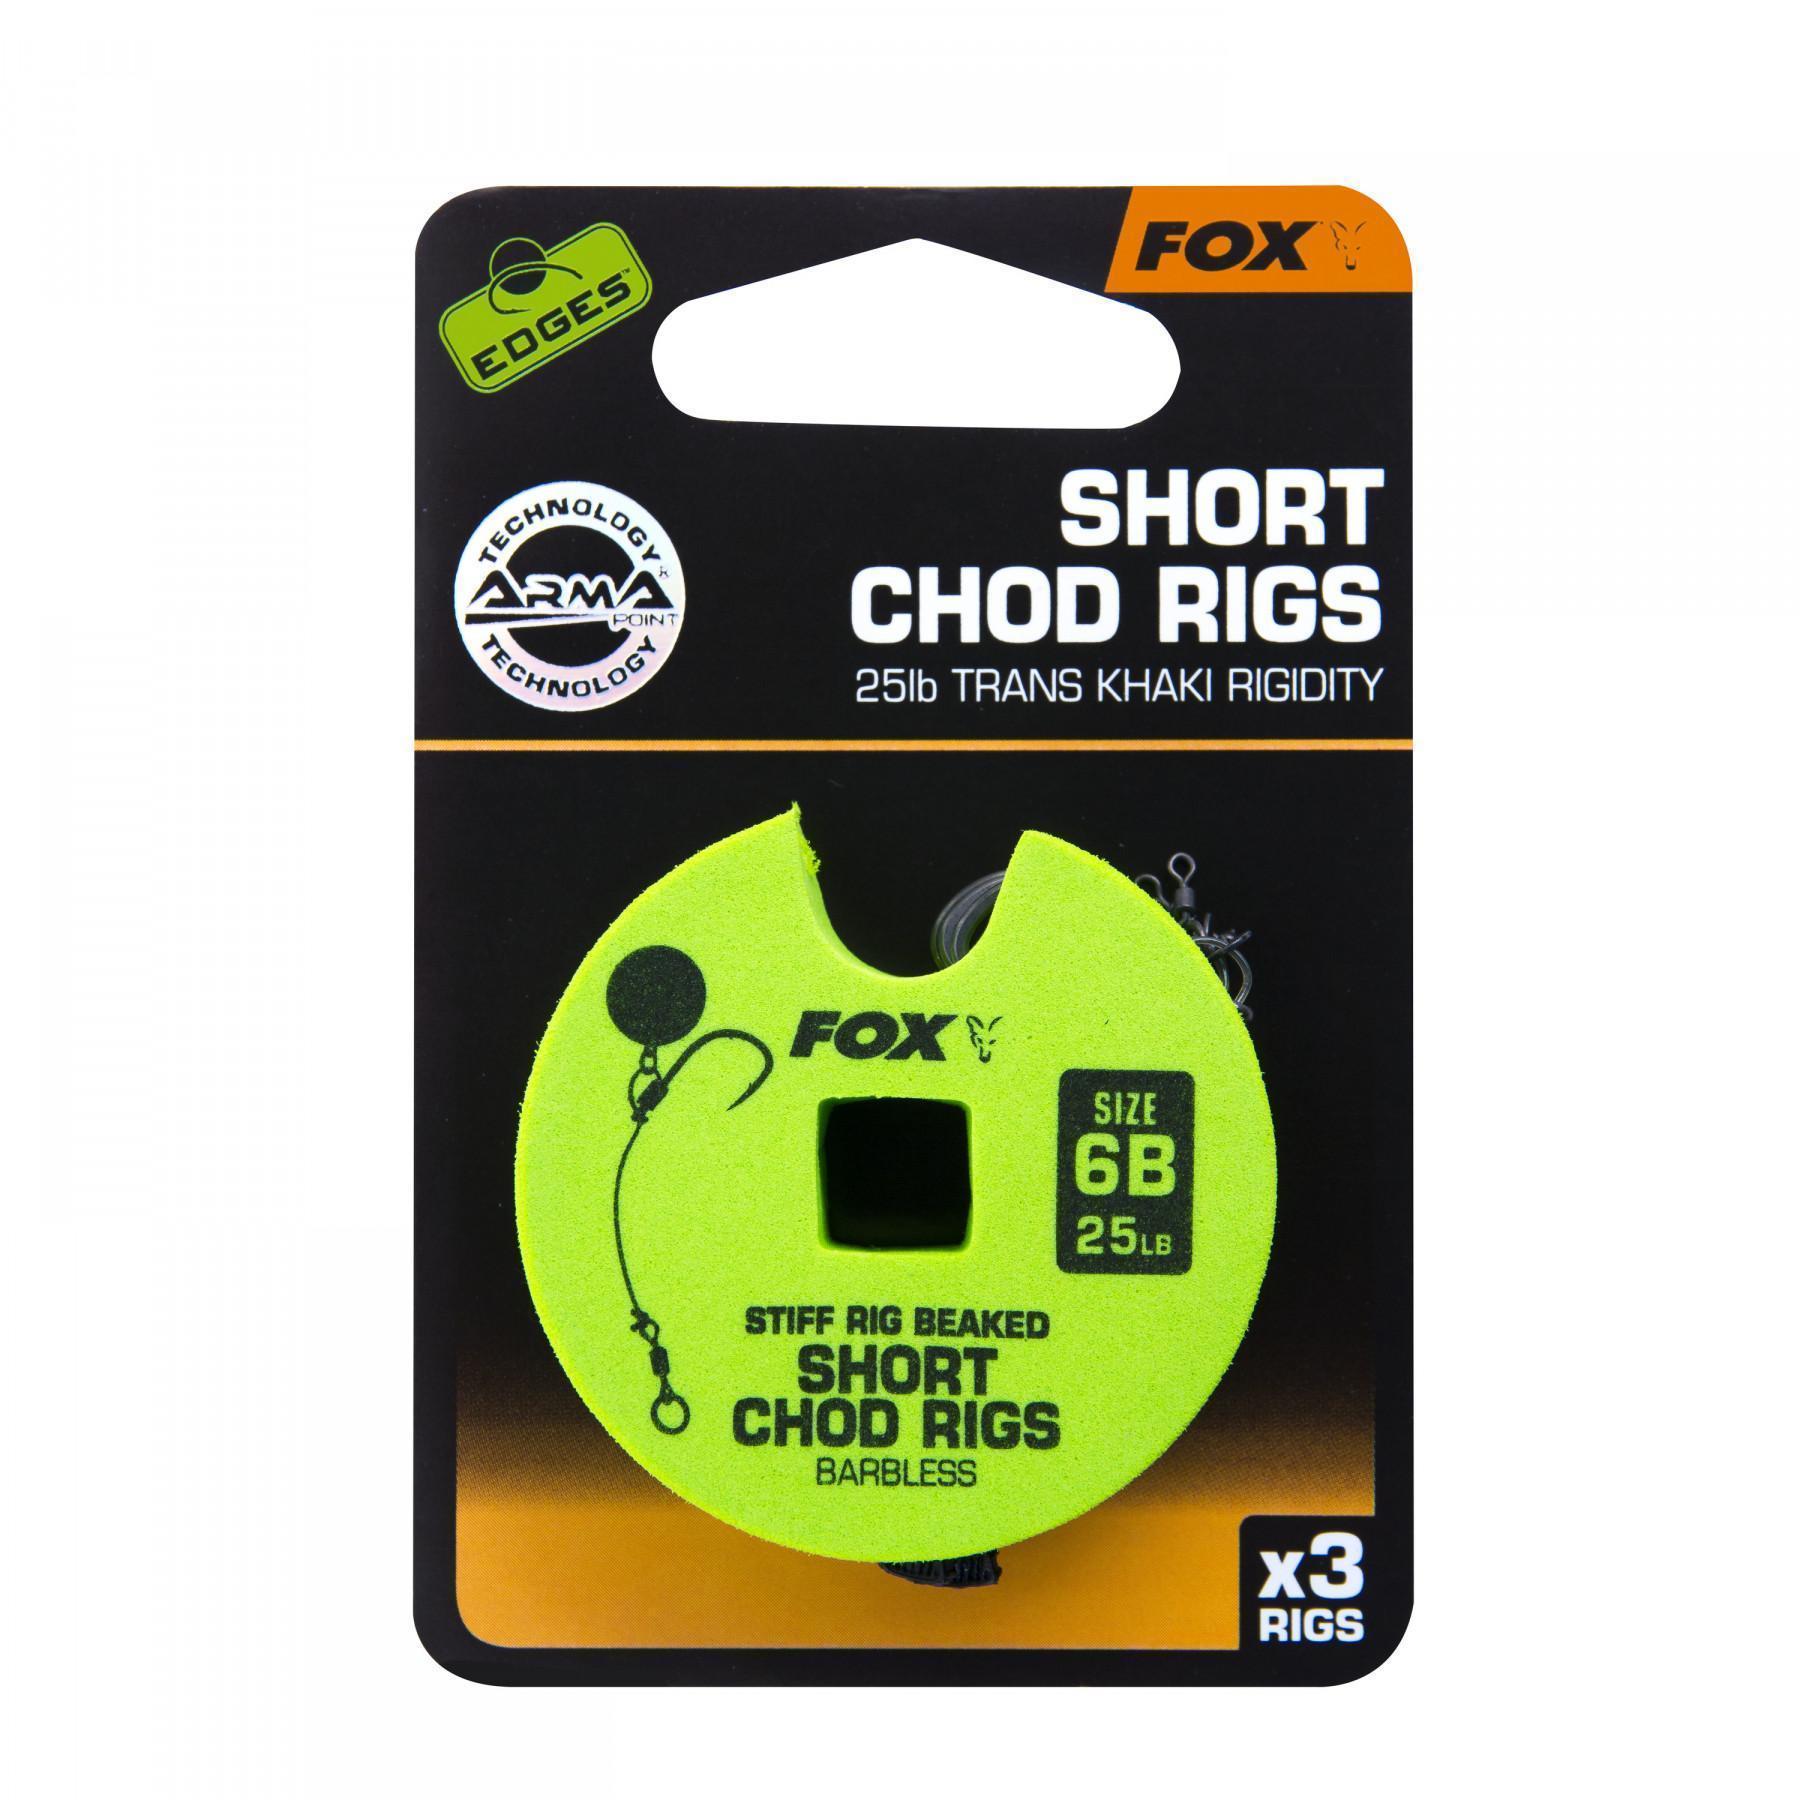 Monofilament Fox 25lb Short Chod Rig Barbless taille 6